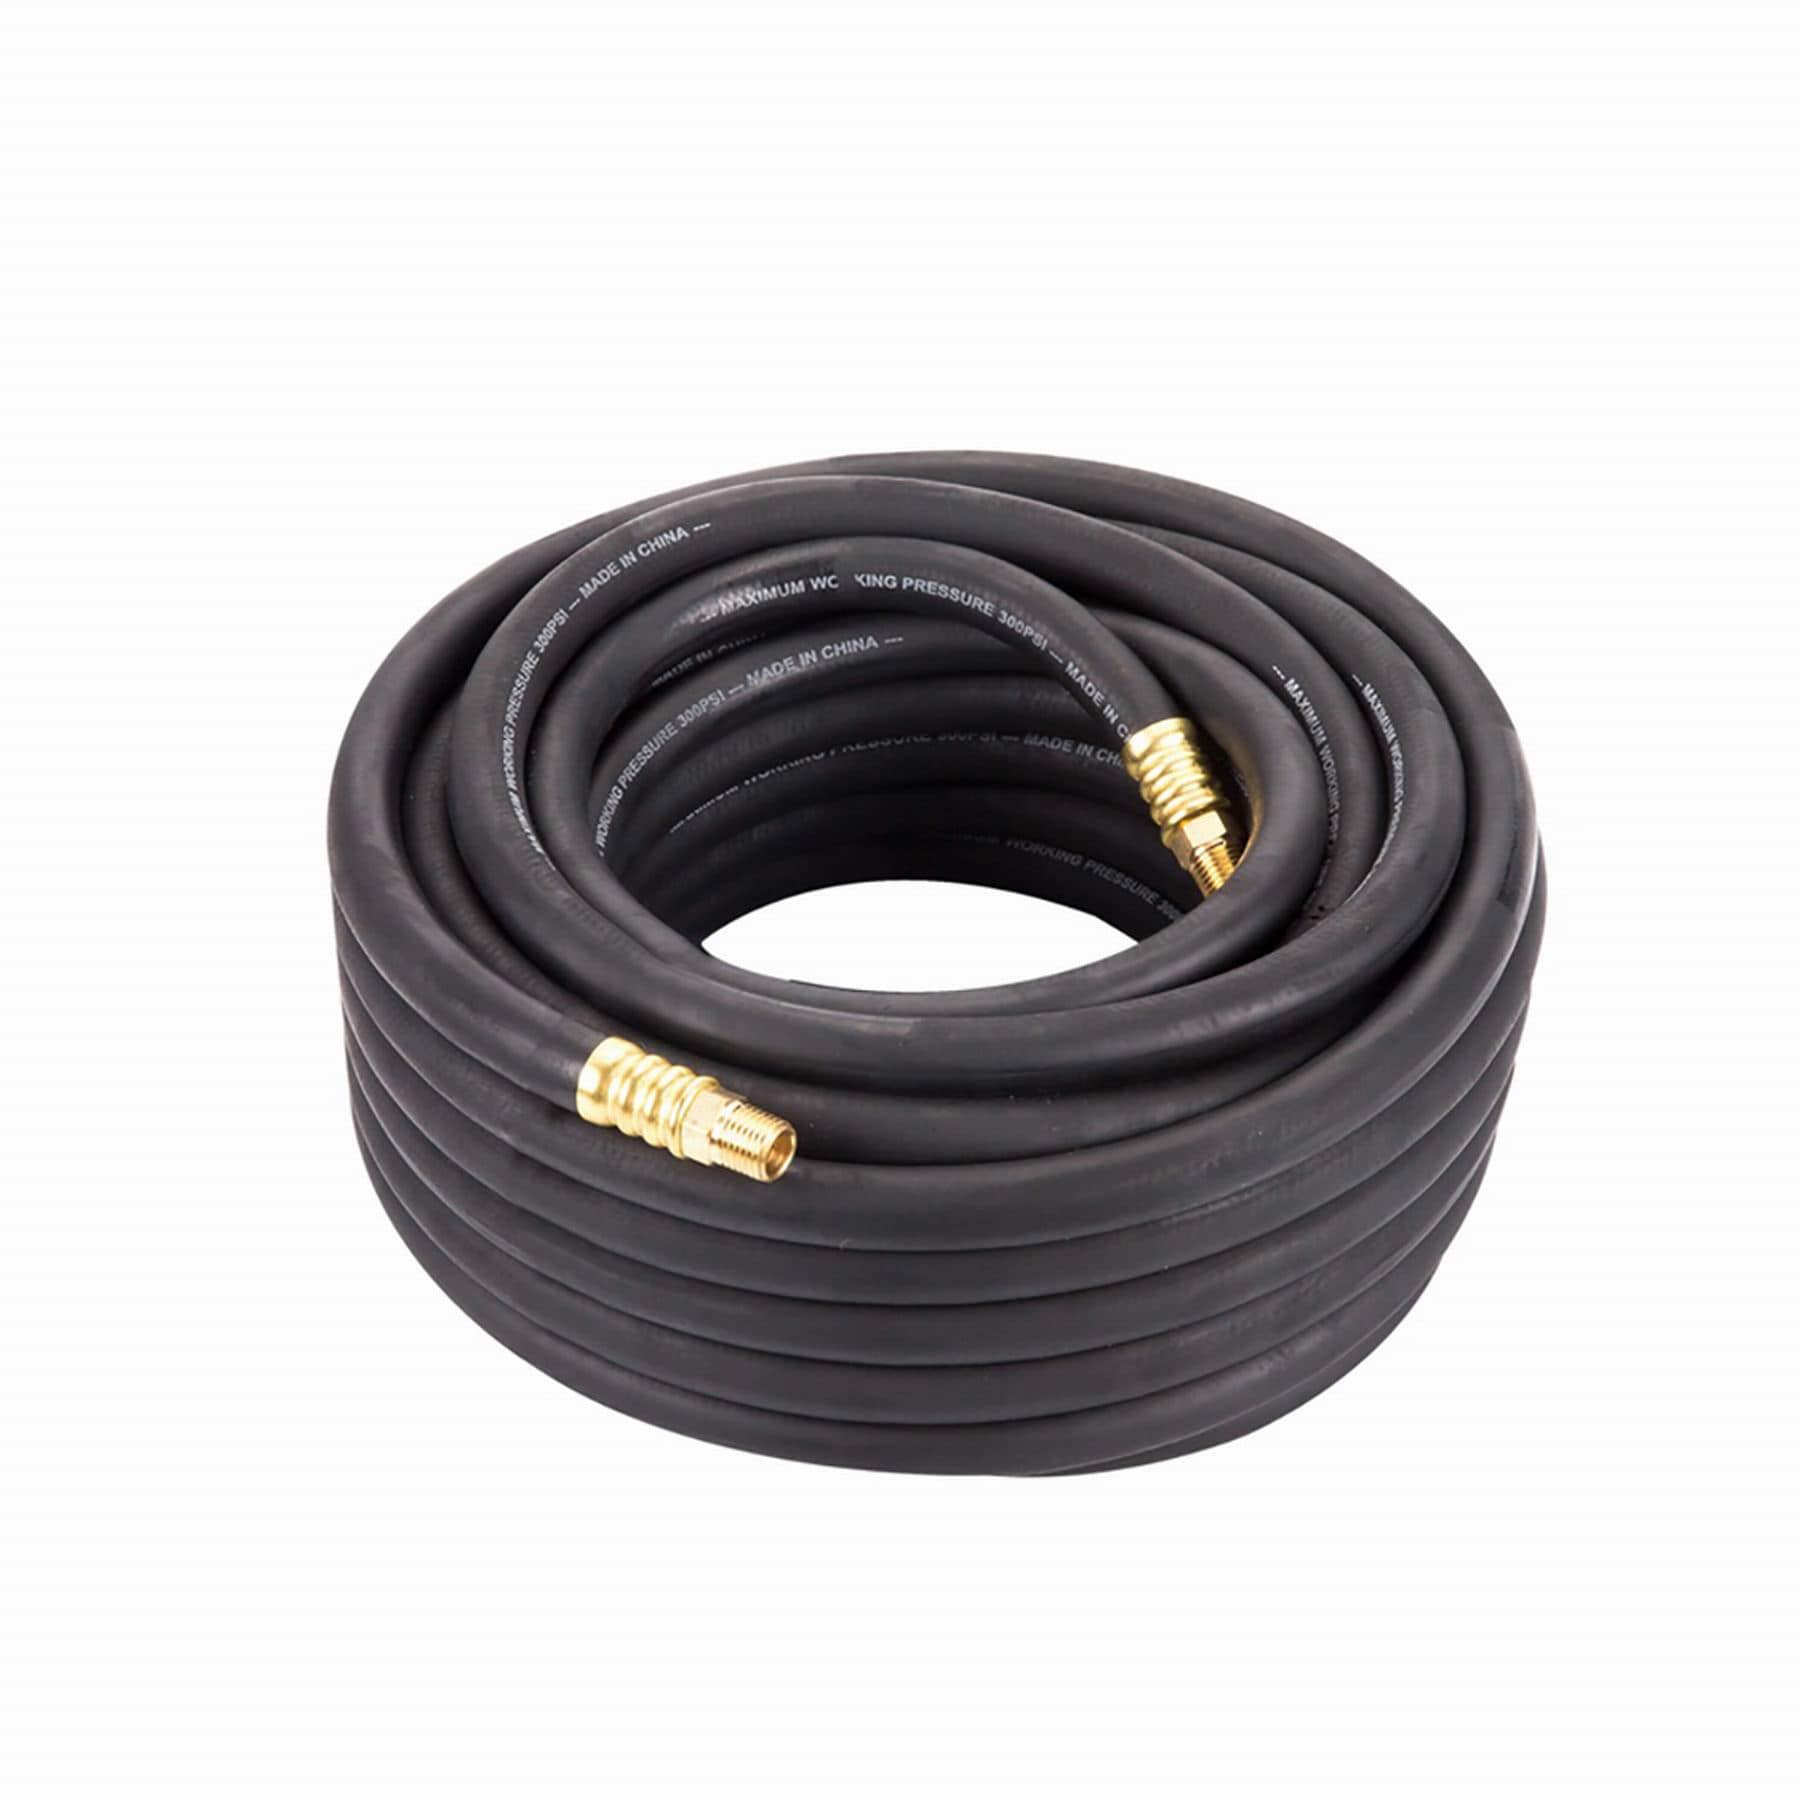 Craftsman 50 ft x 3/8 in Rubber Air Hose 300 PSI